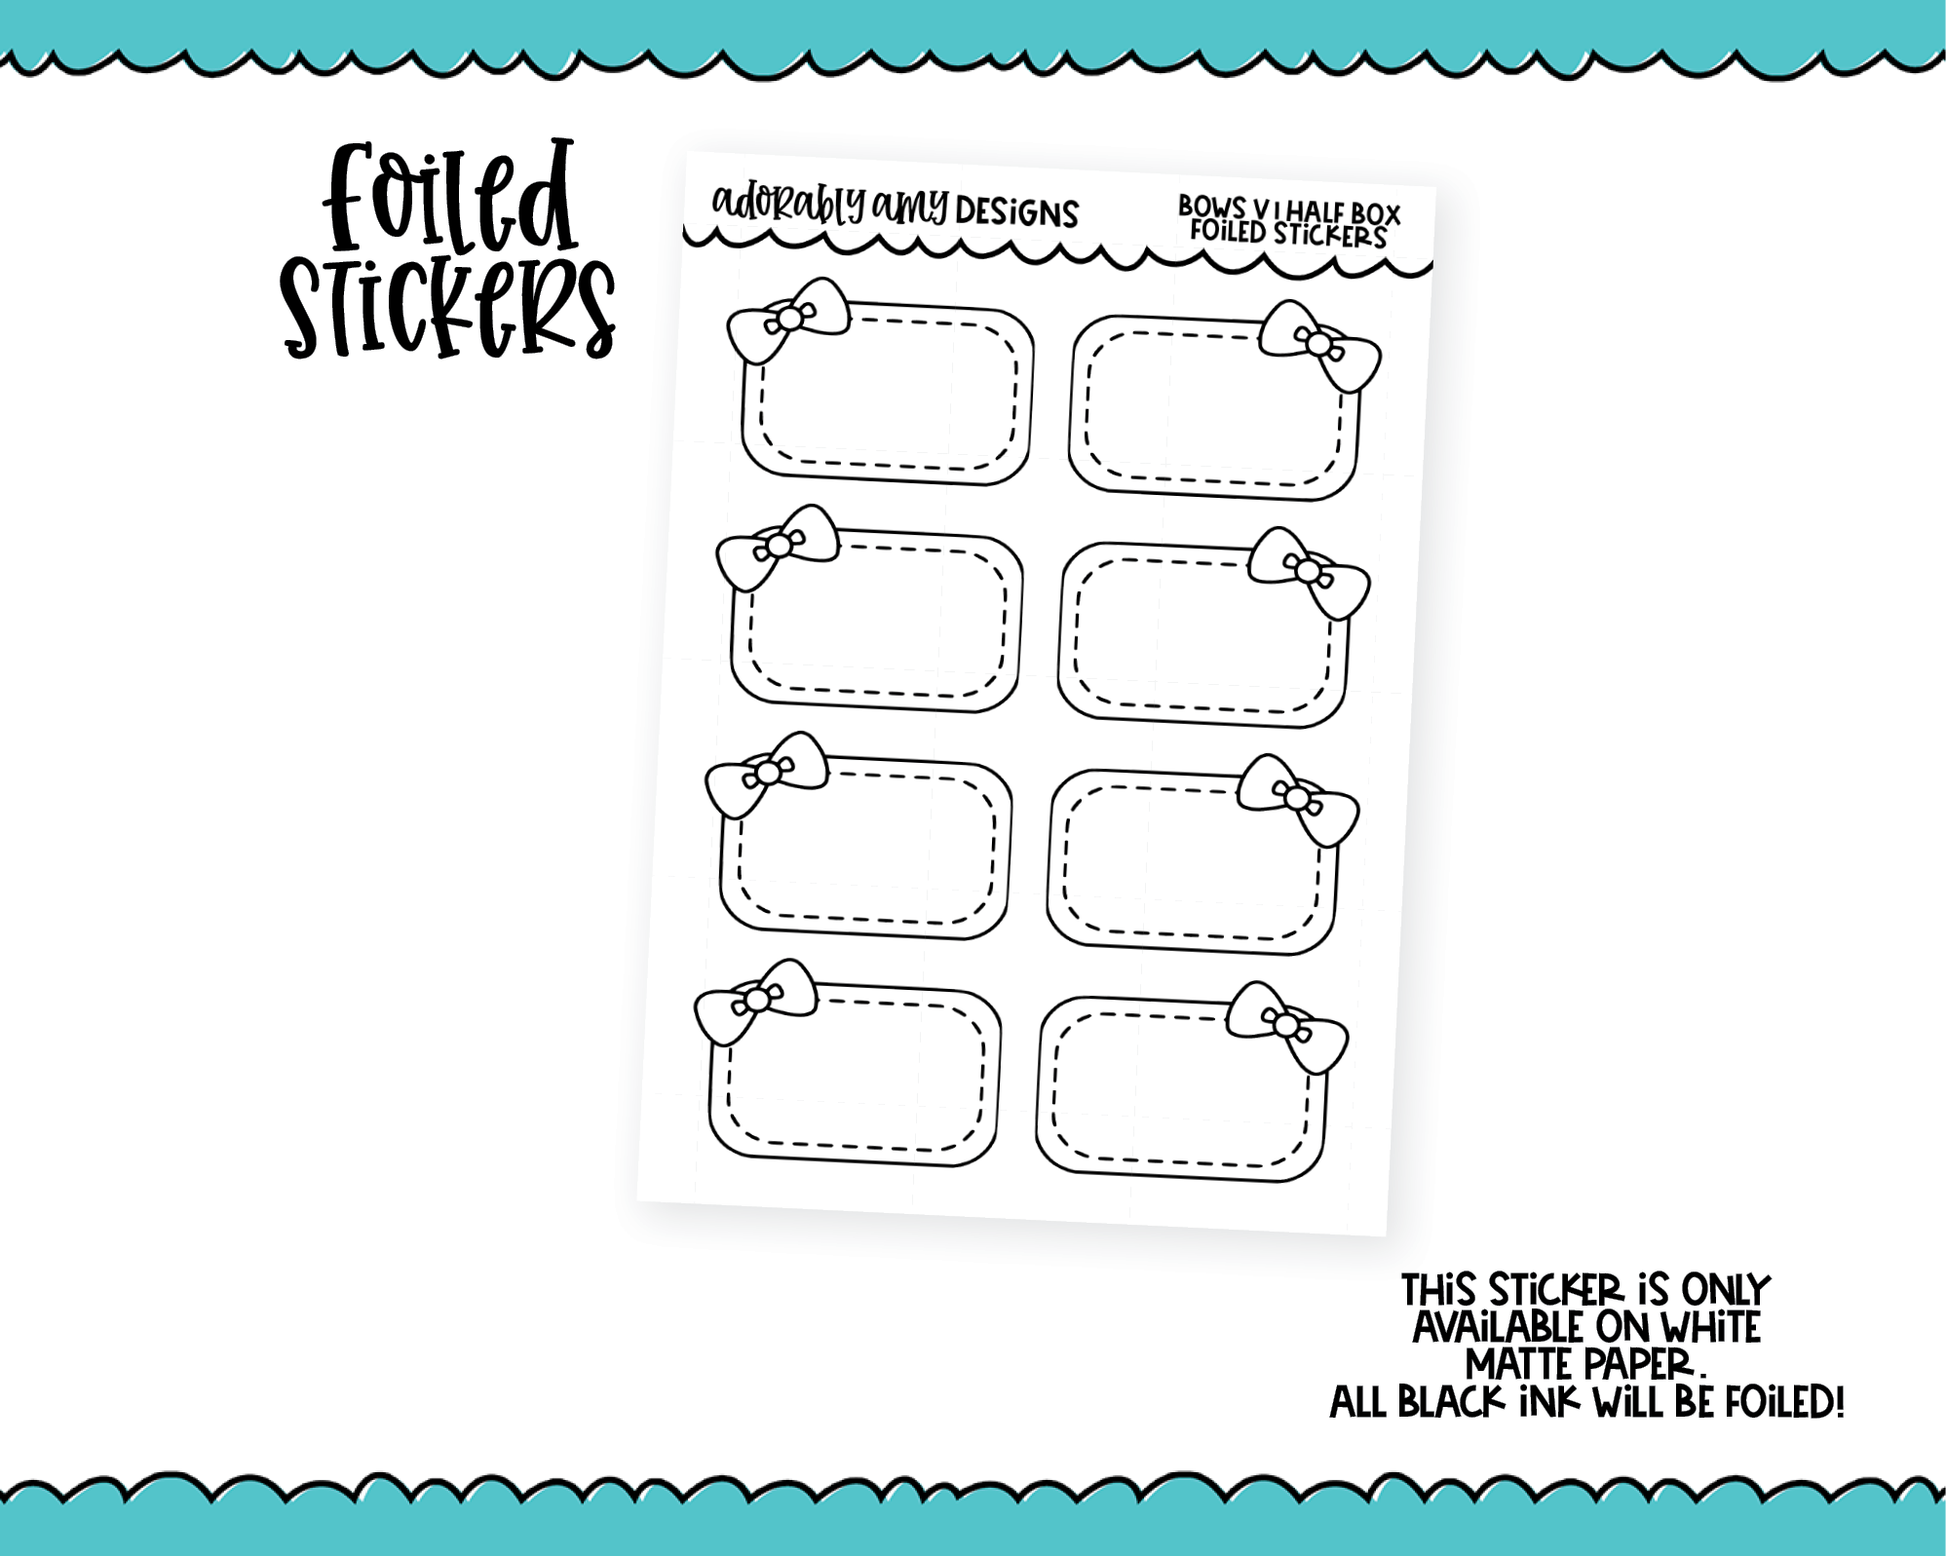 Foiled Bows V1 Half Box Planner Stickers for any Planner or Insert - Adorably Amy Designs